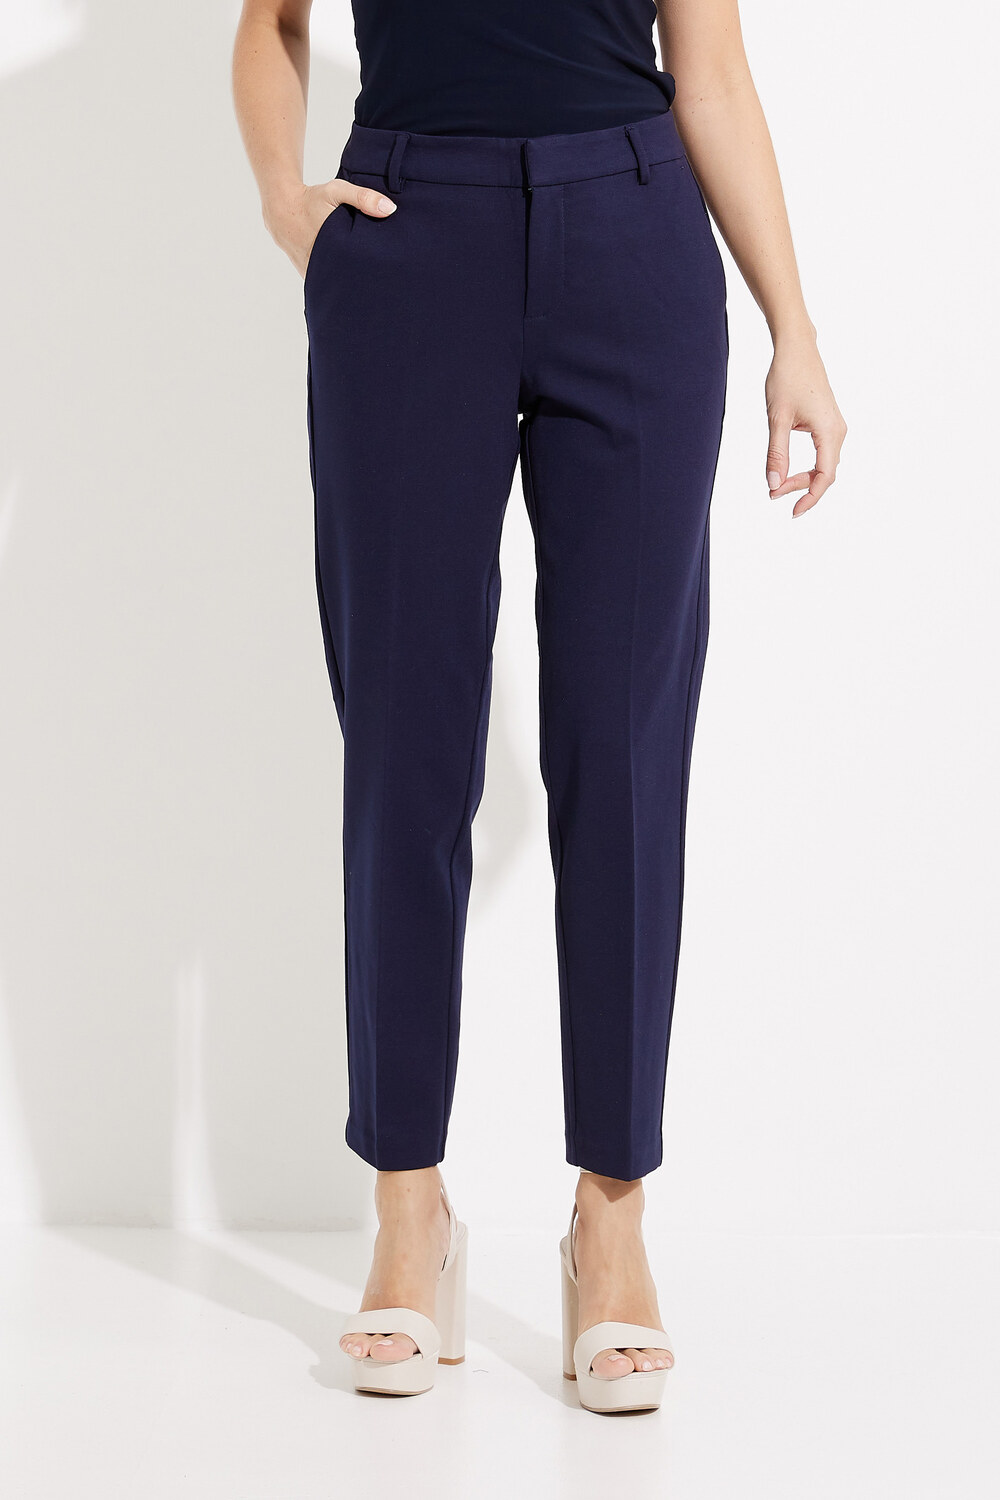 Pleated Knit Trouser Style LM5084M42F. Cadet